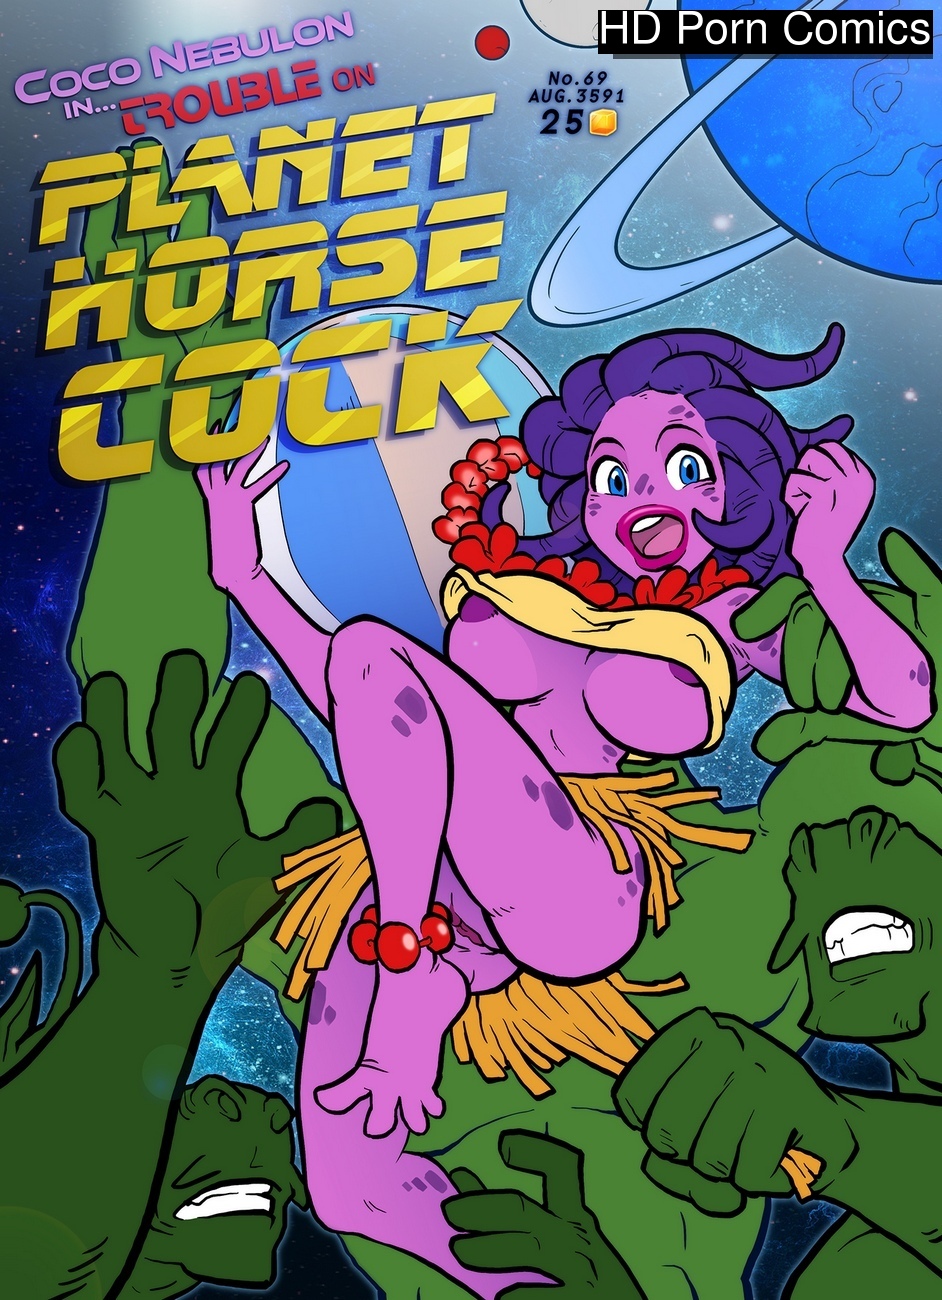 Belly Bulge Animated Horse Porn Comic - Trouble On Planet Horse Cock comic porn - HD Porn Comics